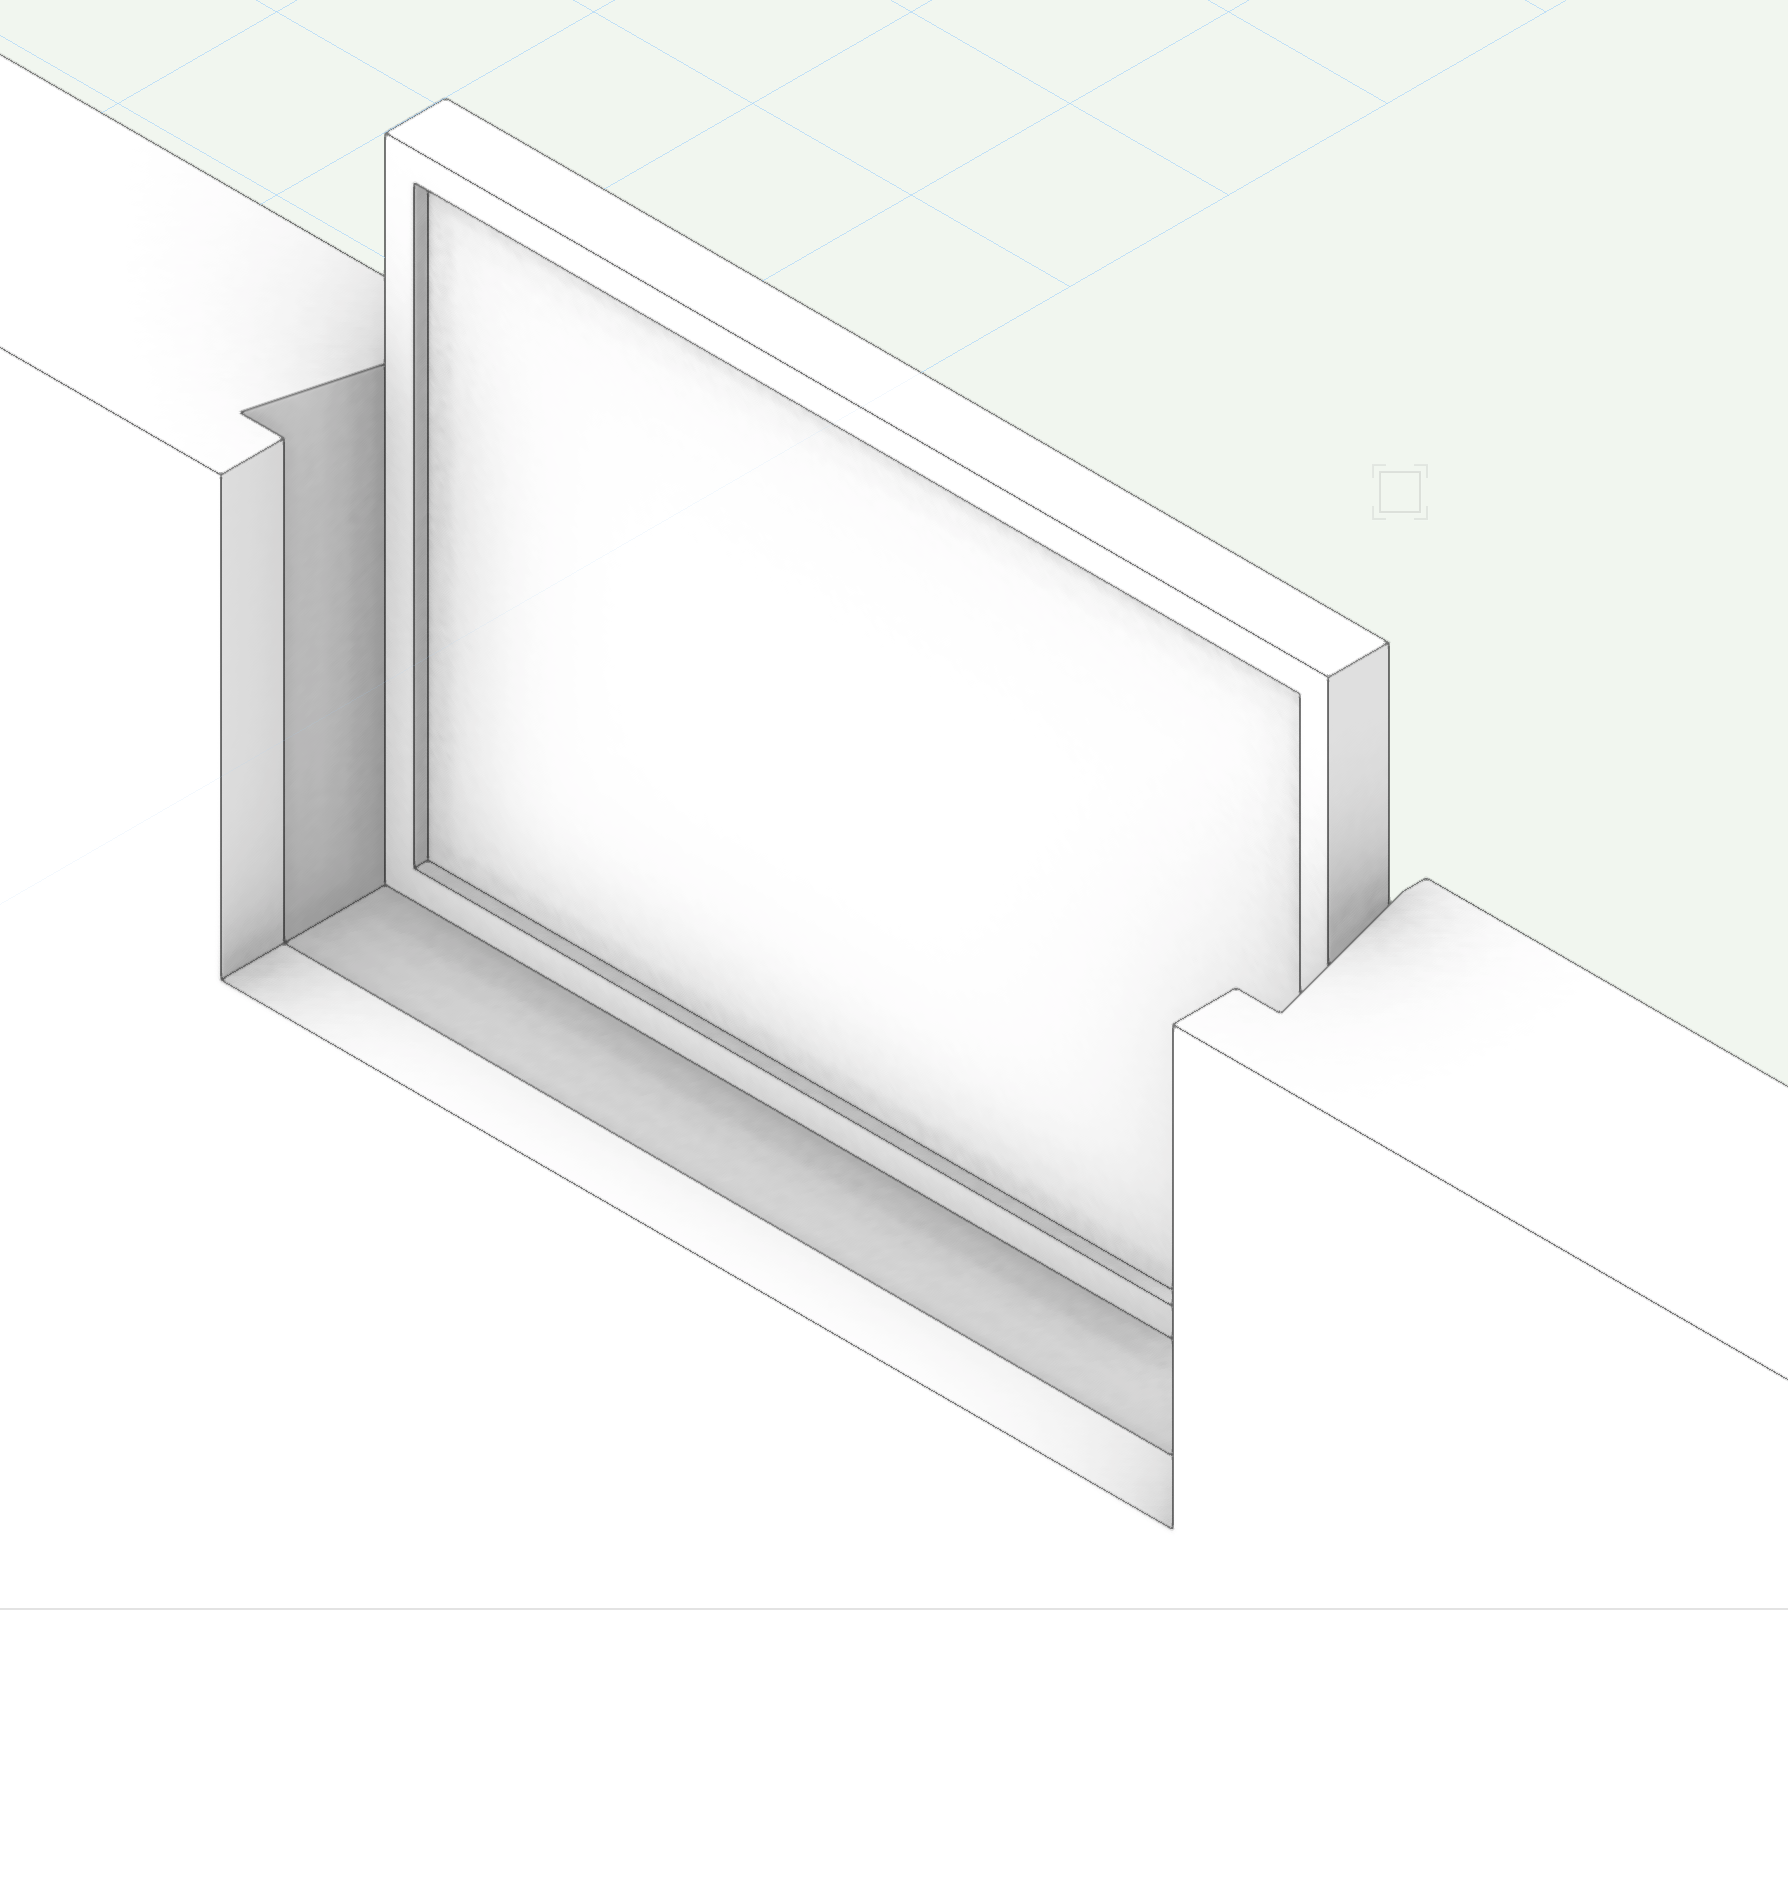 Window splay problem - General Discussion - Vectorworks Community Board